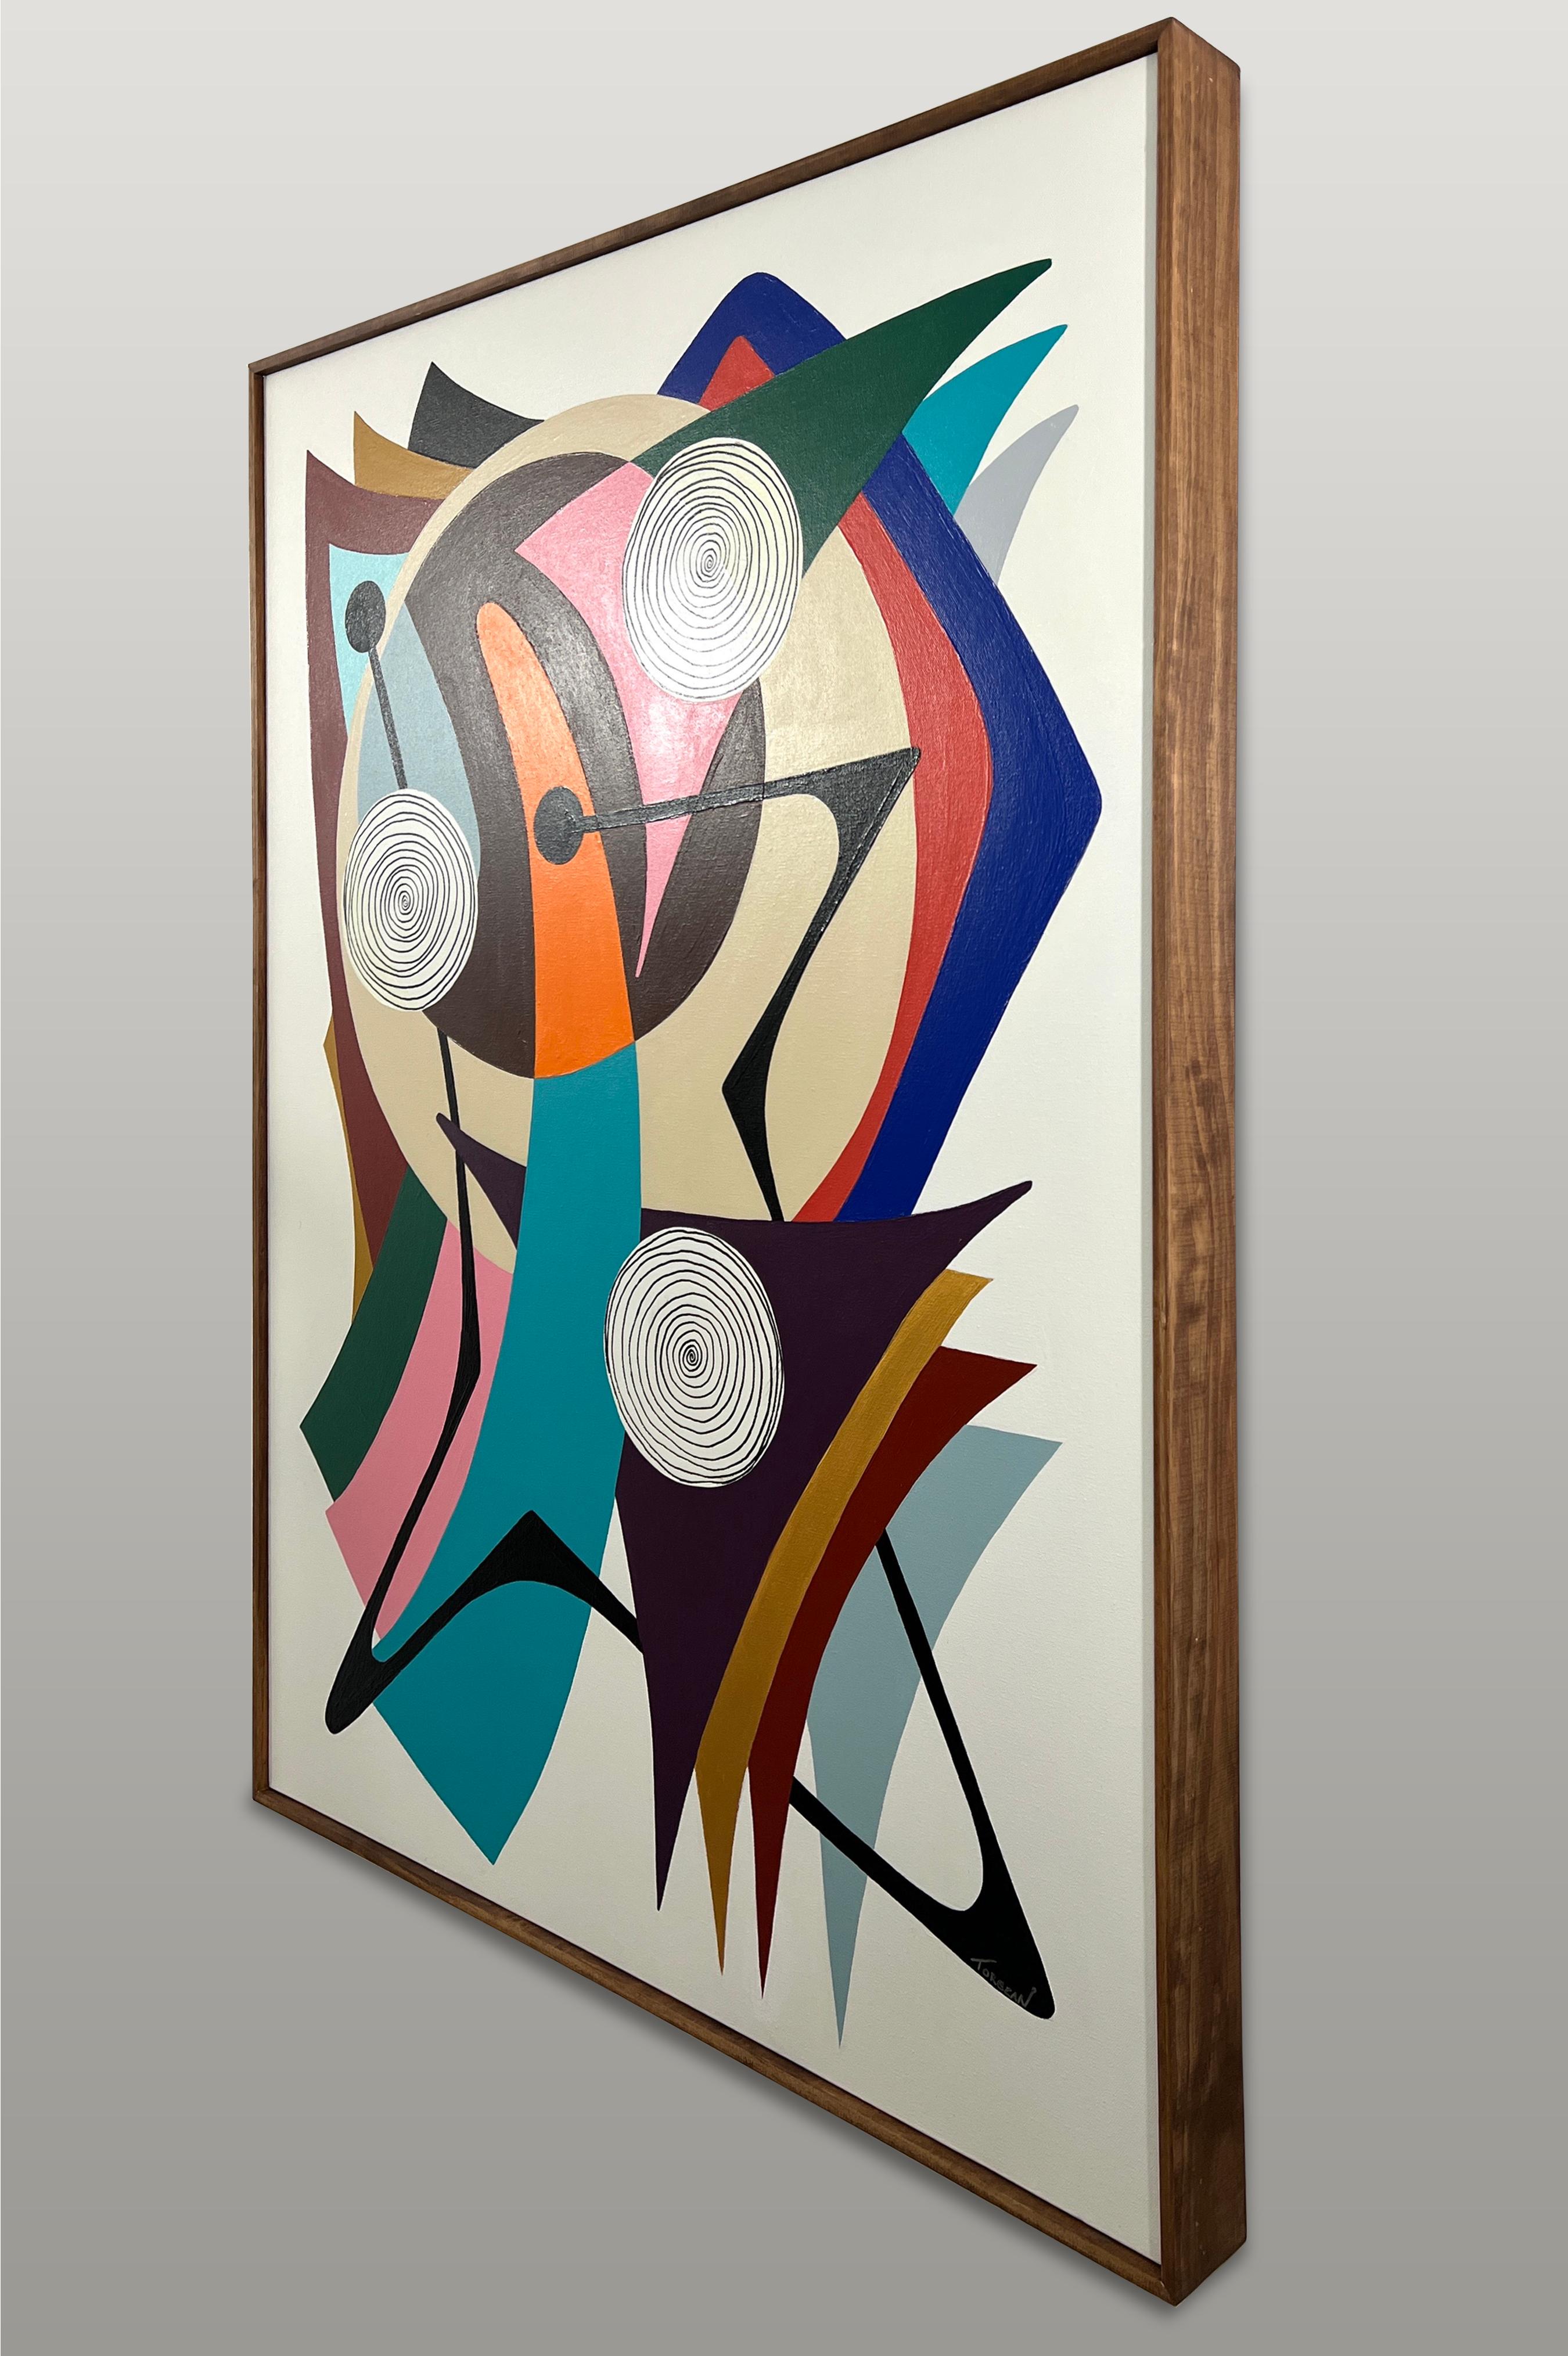 This abstract composition is a visual representation of the vibrant Brazilian music genre, Samba Bom.